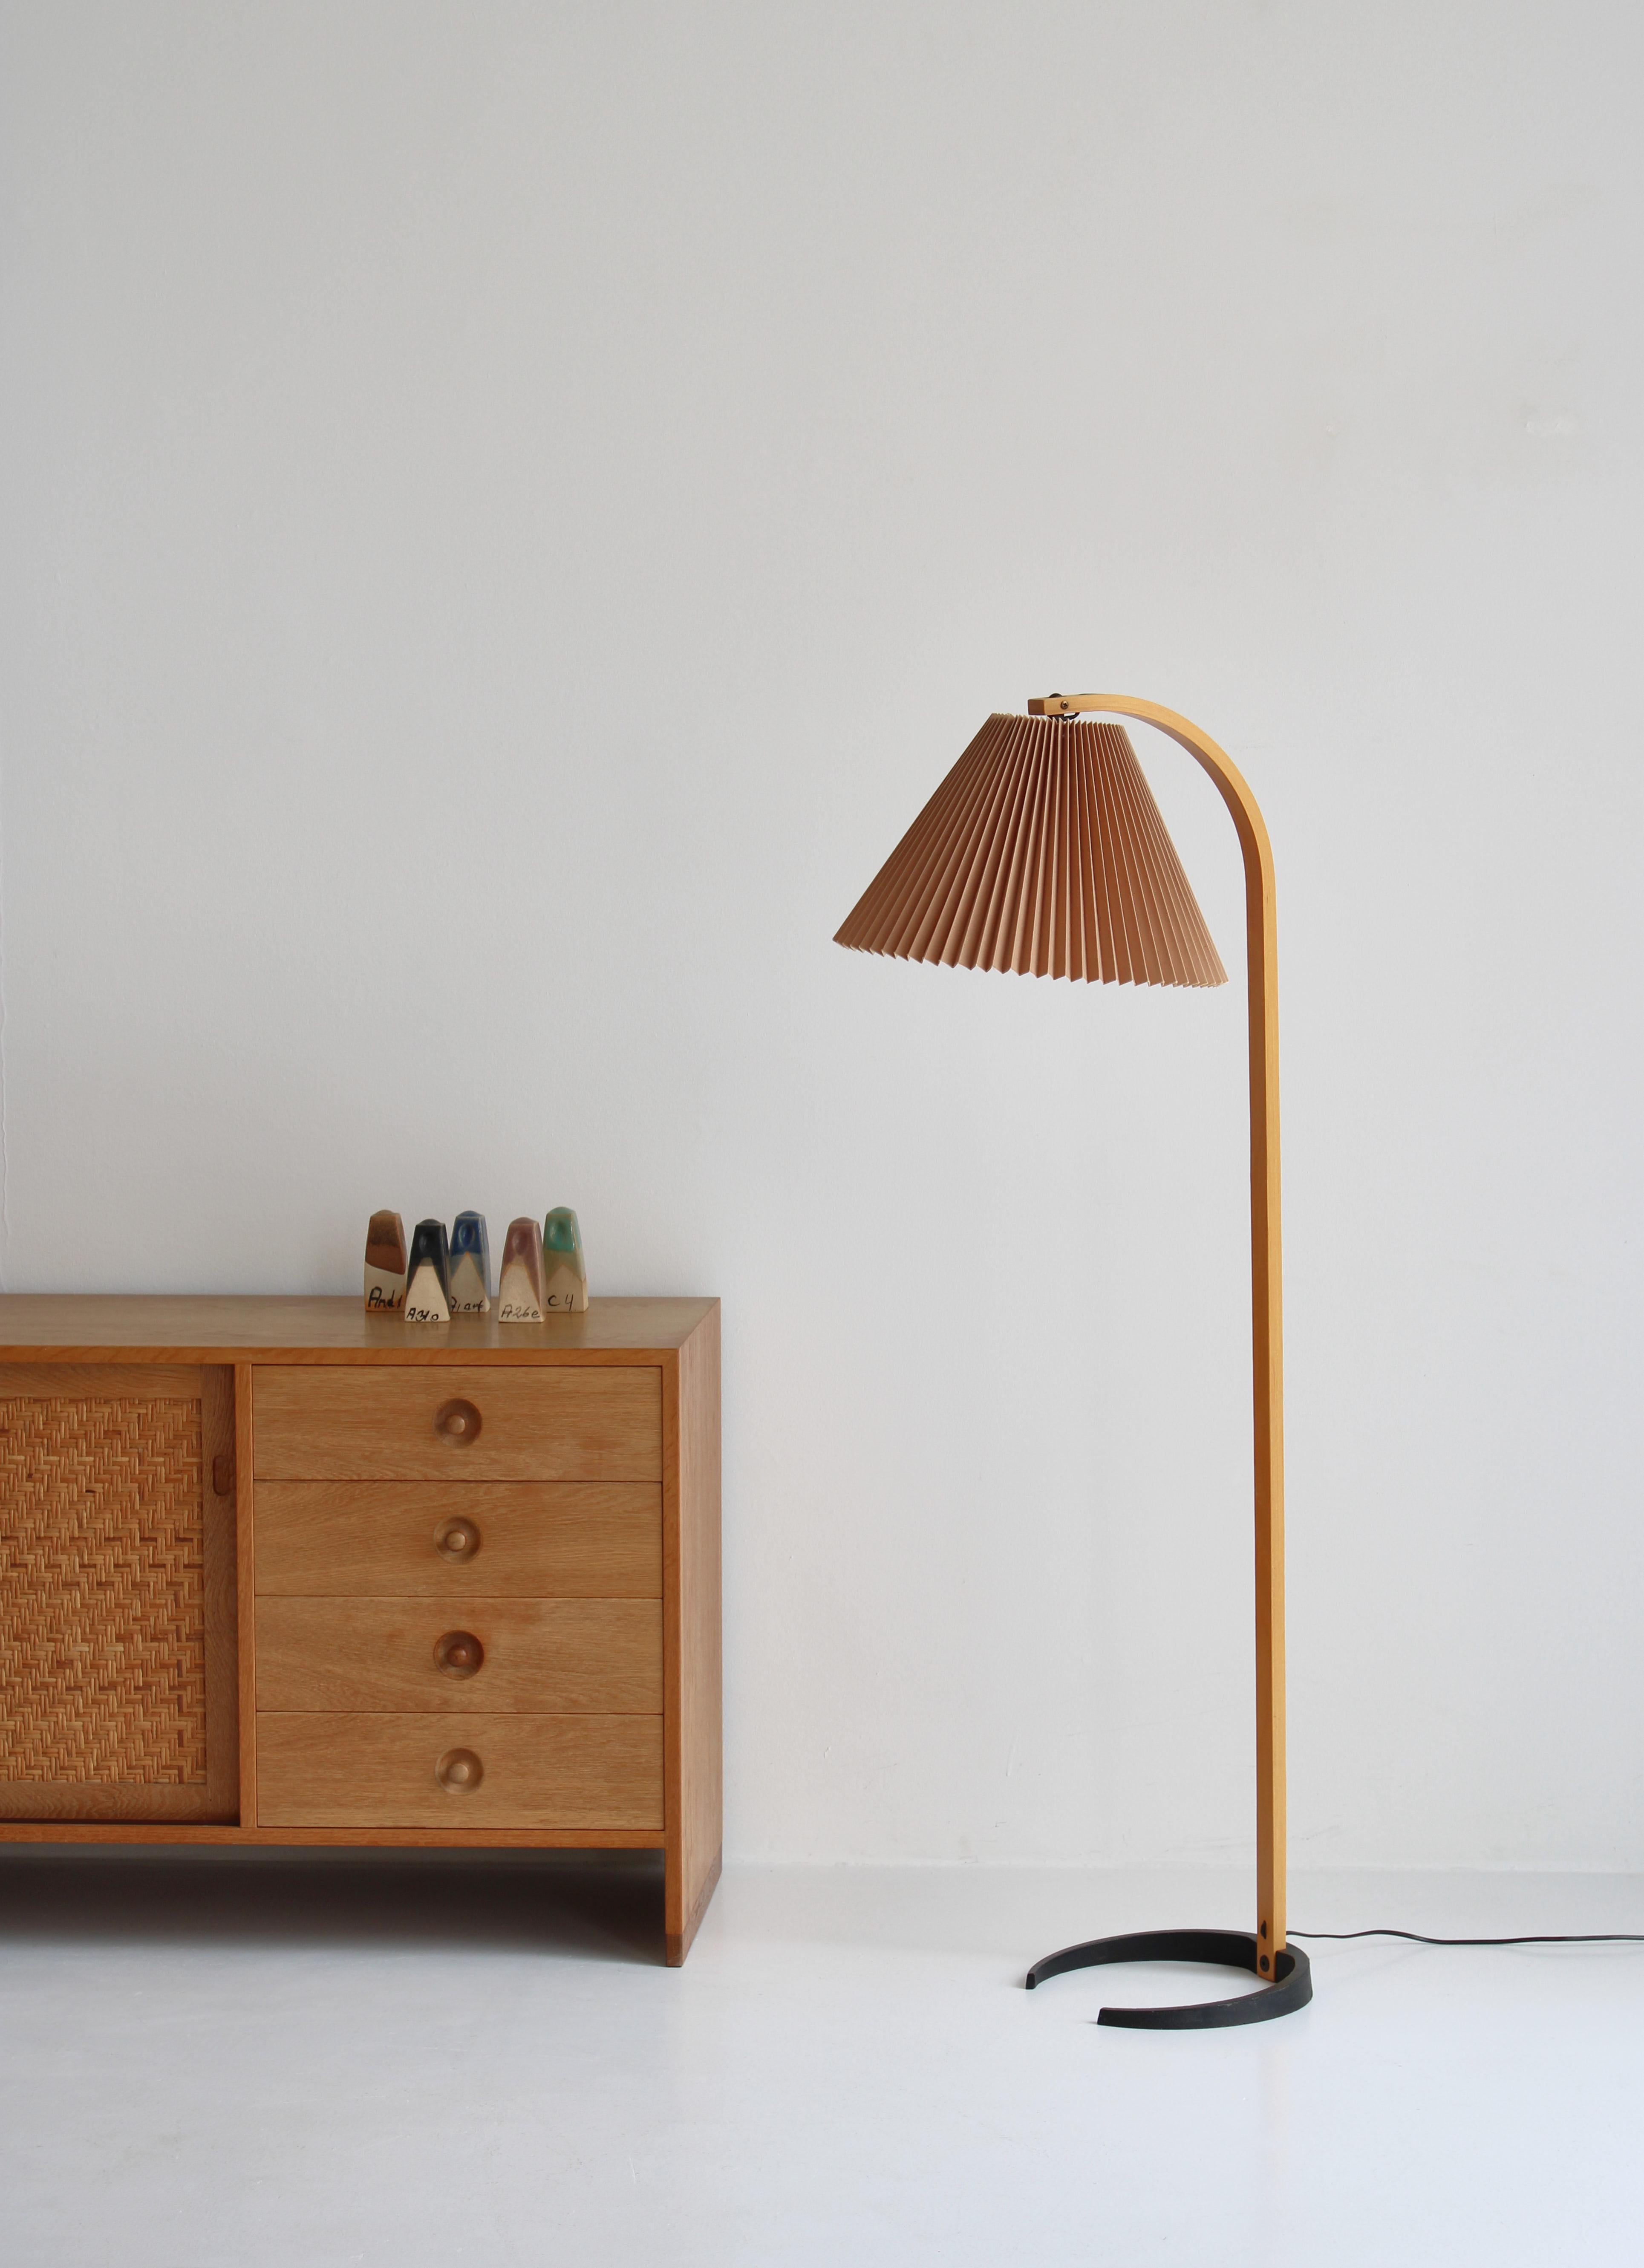 An original Caprani Lights floor lamp designed by Danish architect Mads Caprani in the 1970s. This vintage lamp features a sculptural bent plywood stand with an elegant curve, a cast iron crescent shaped base, and original hand pleated blush linen